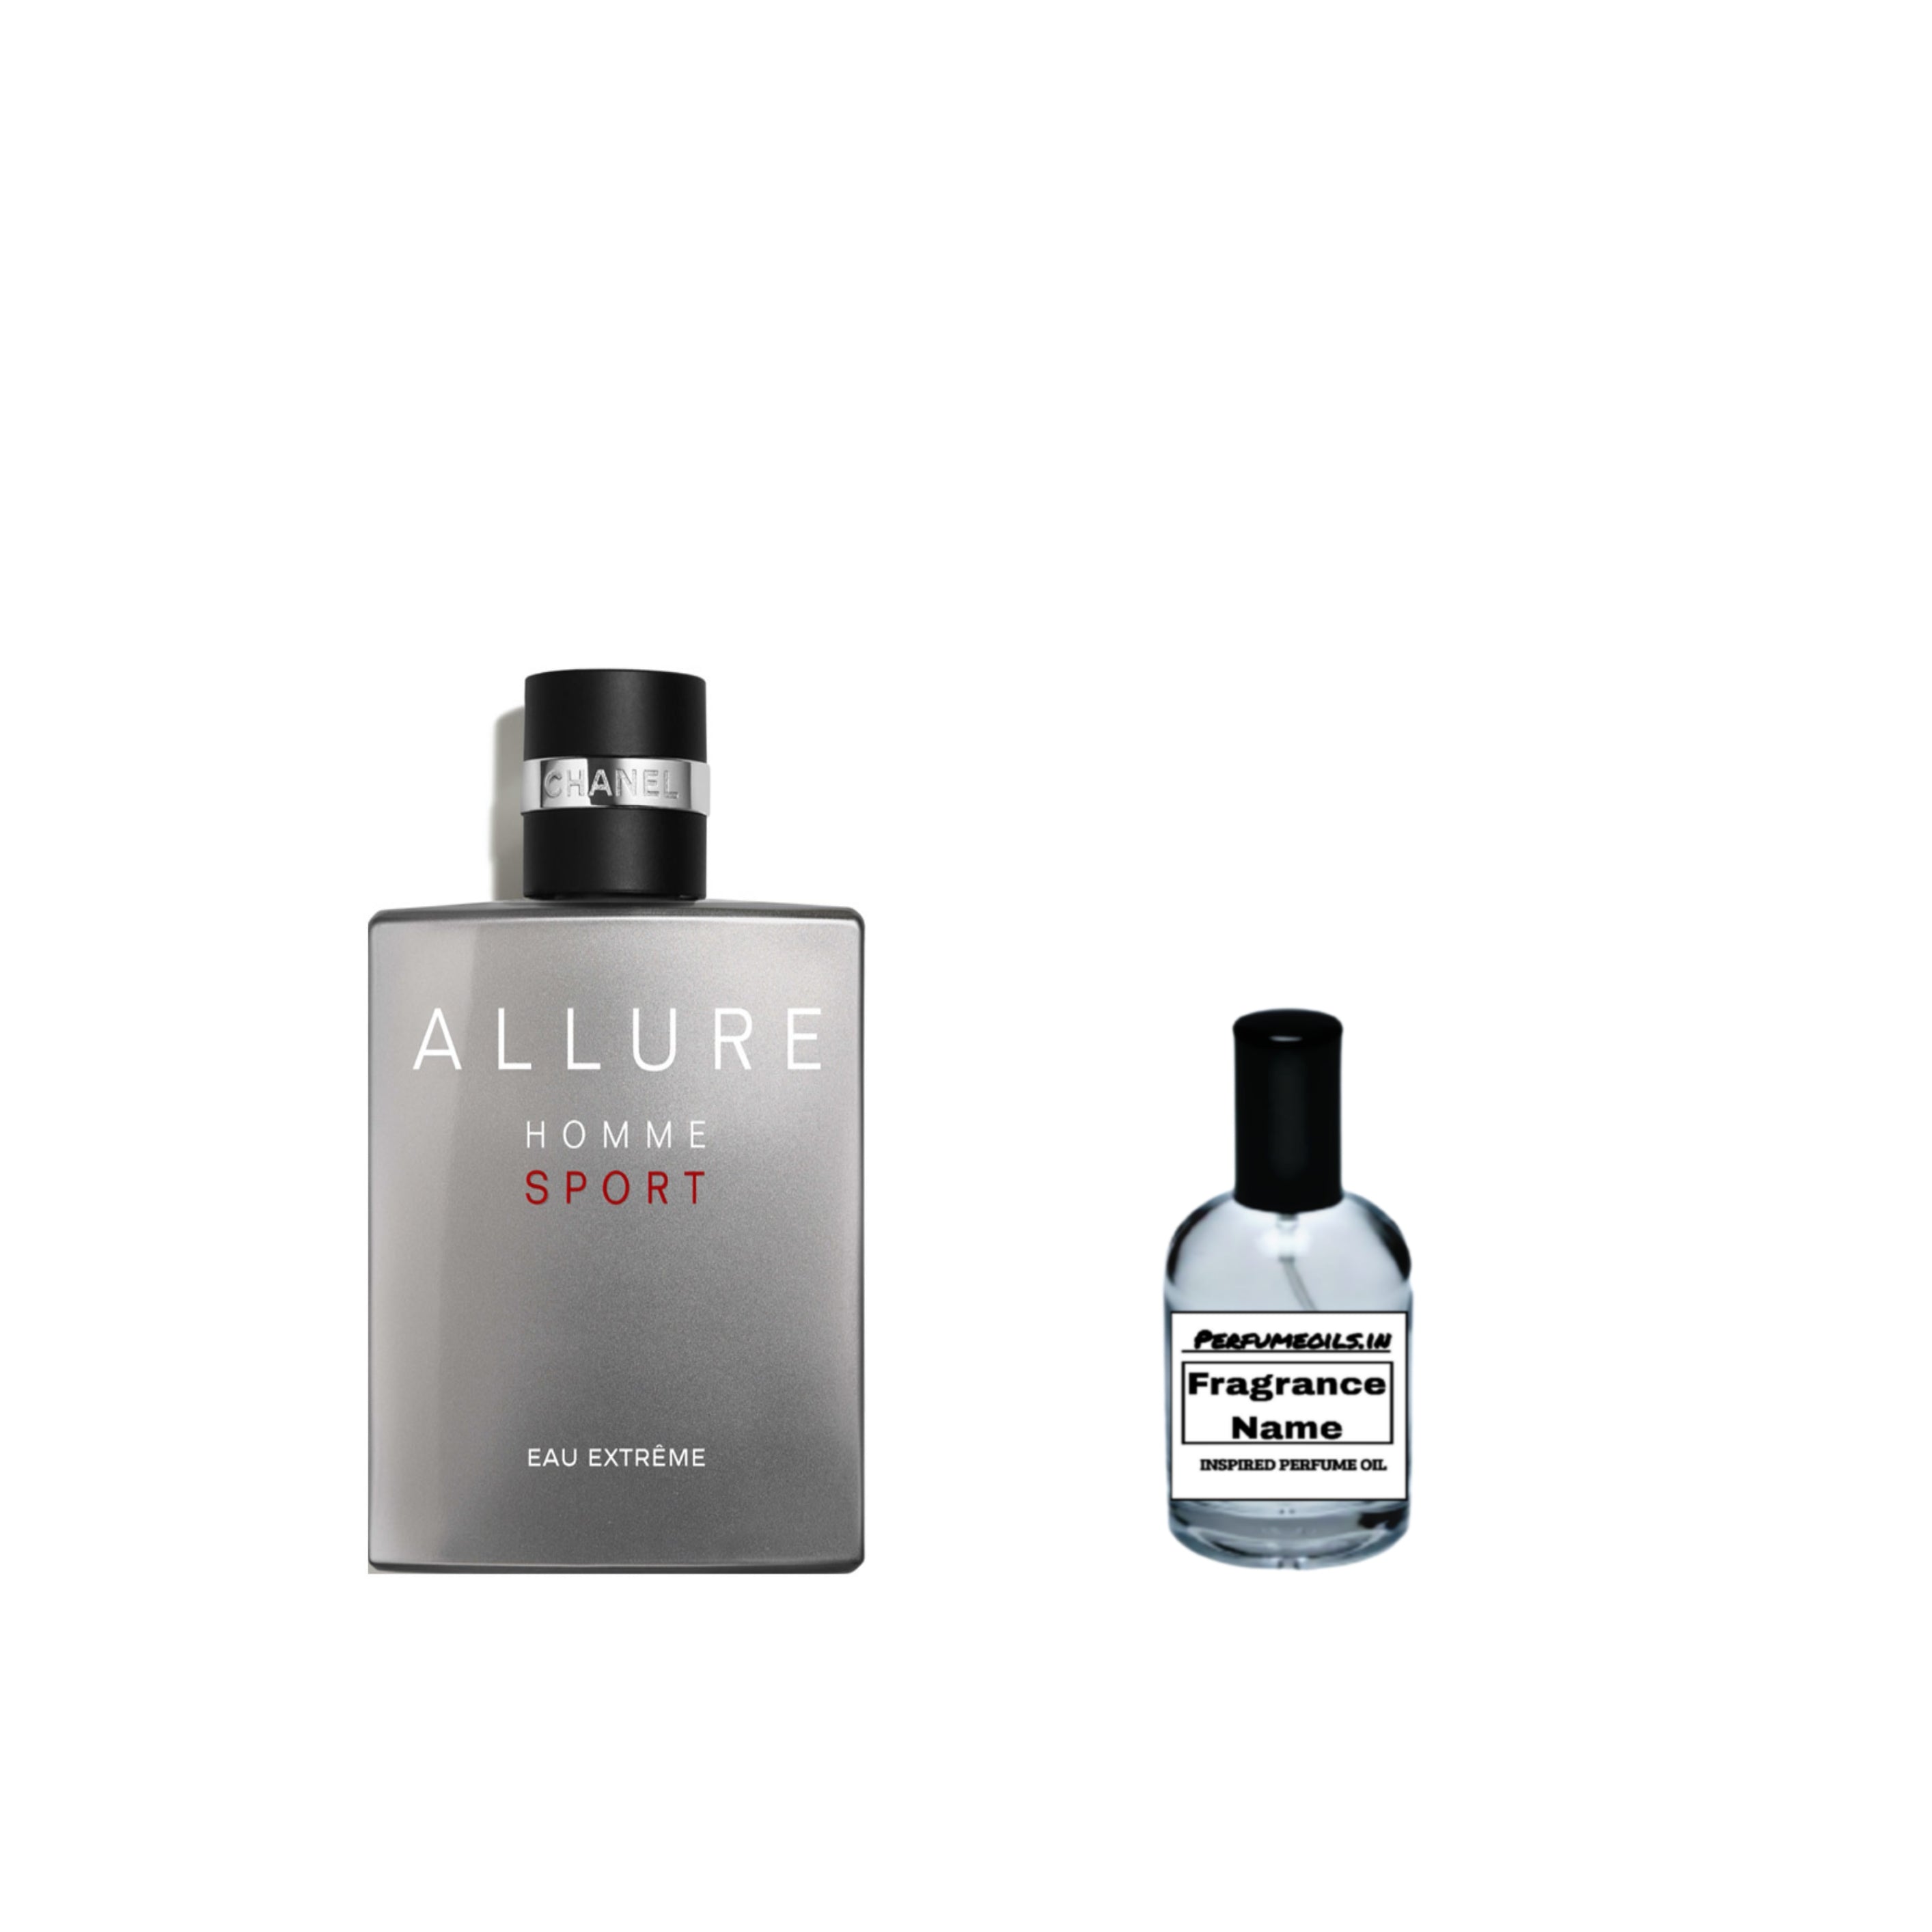 Shop for samples of Allure Homme Sport Eau Extreme (Eau de Parfum) by Chanel  for men rebottled and repacked by